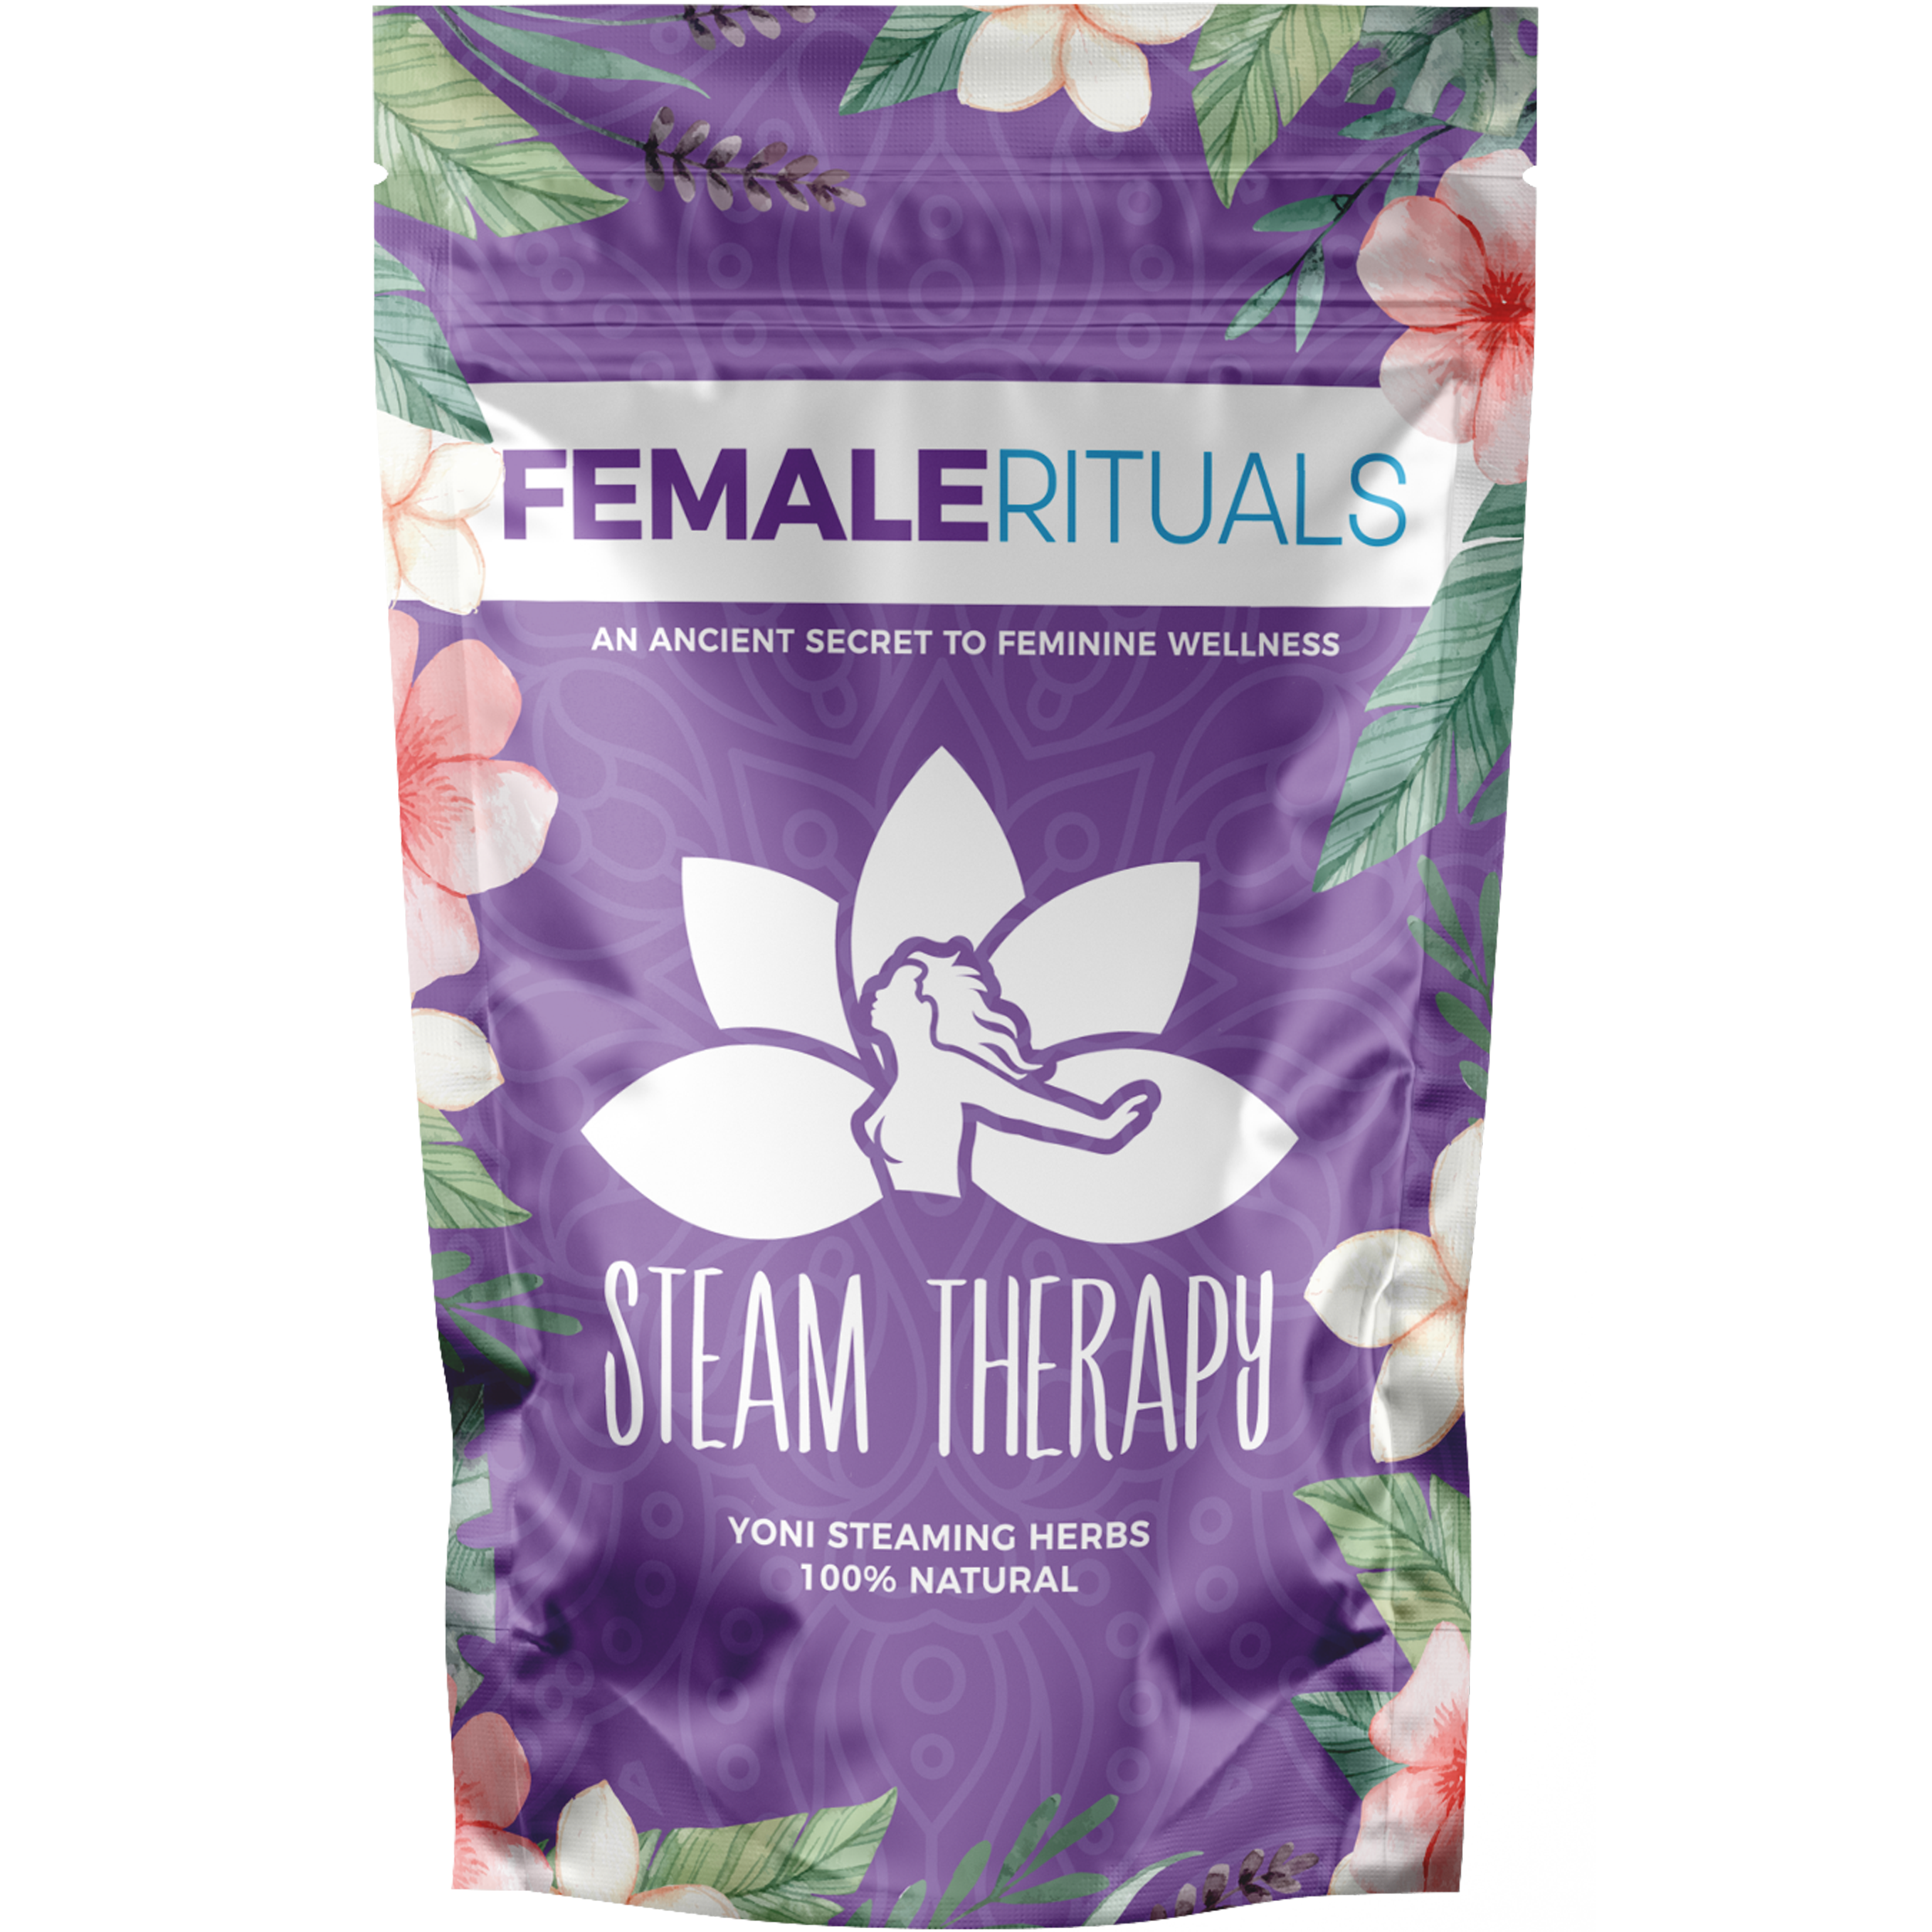 Natural Yoni Steaming Herbs: Steam Therapy – FEMALE RITUALS